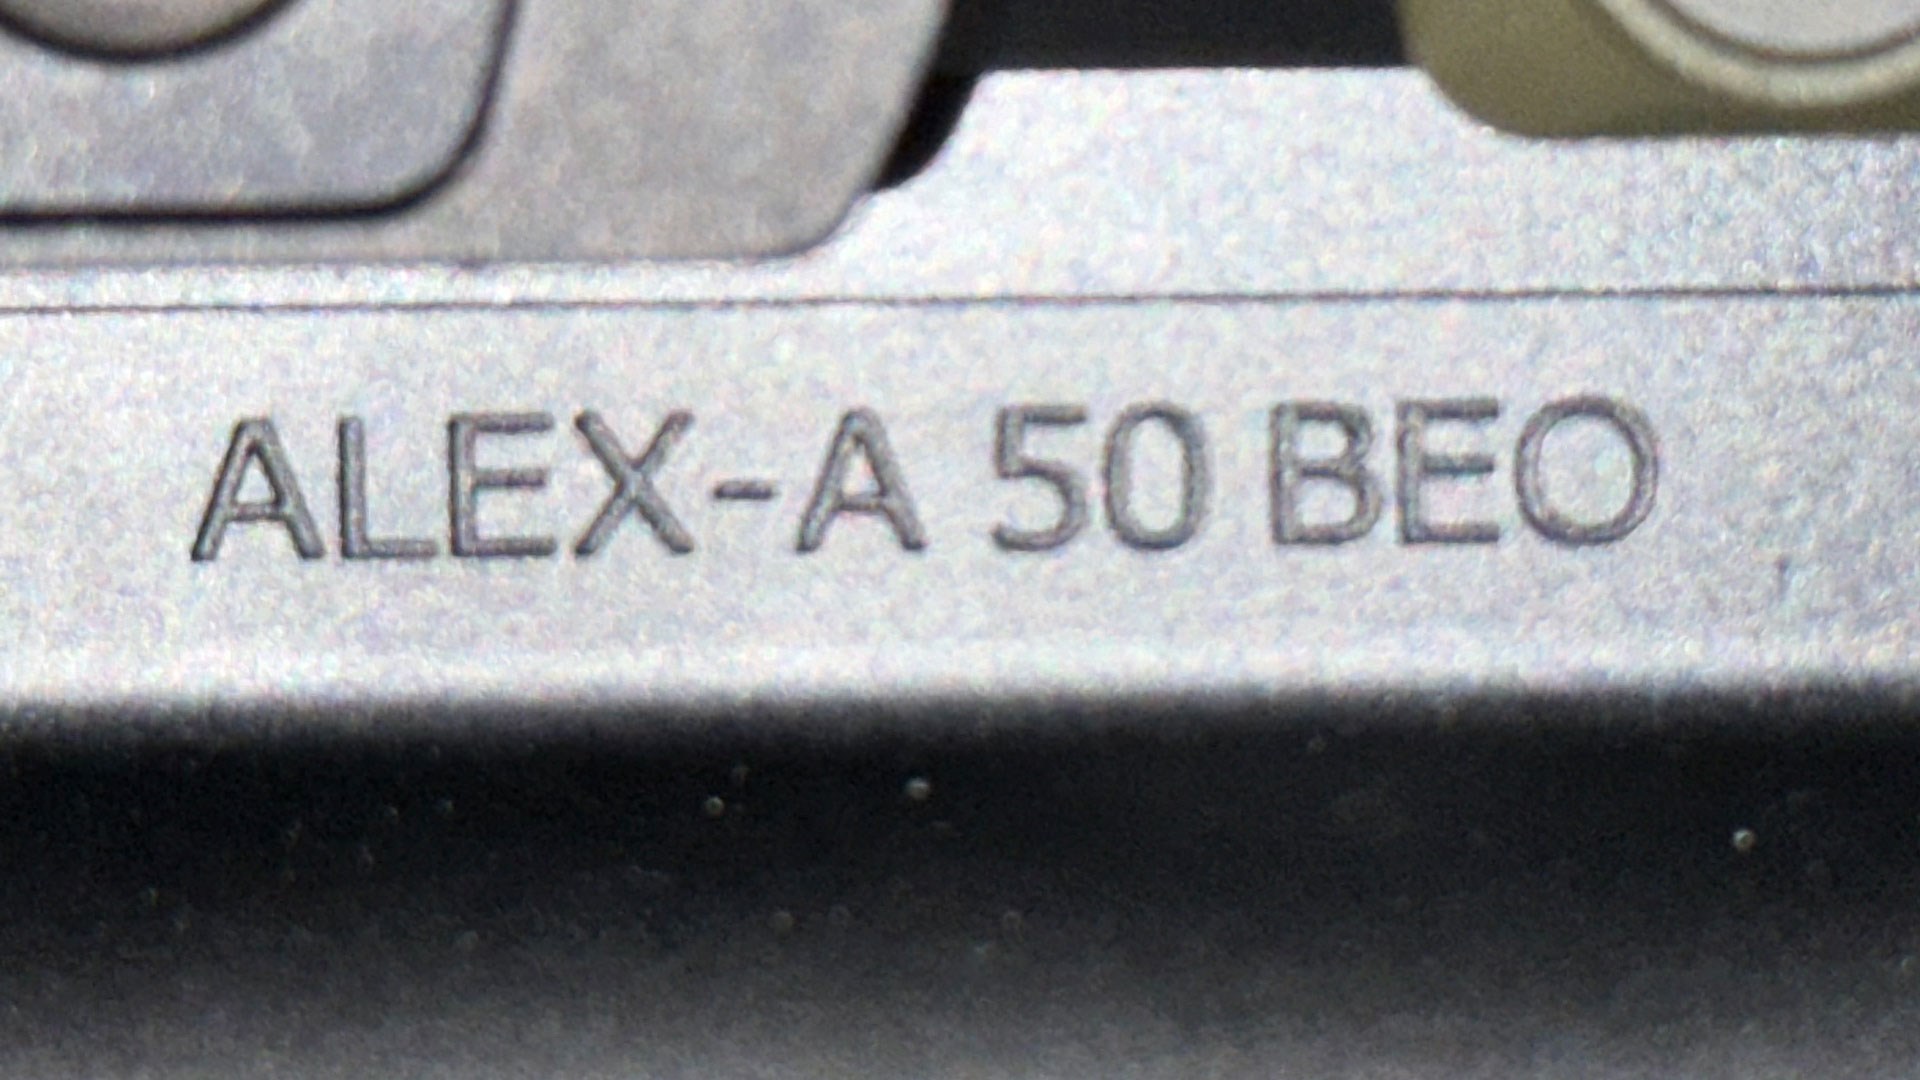 50 Beowulf Stamp